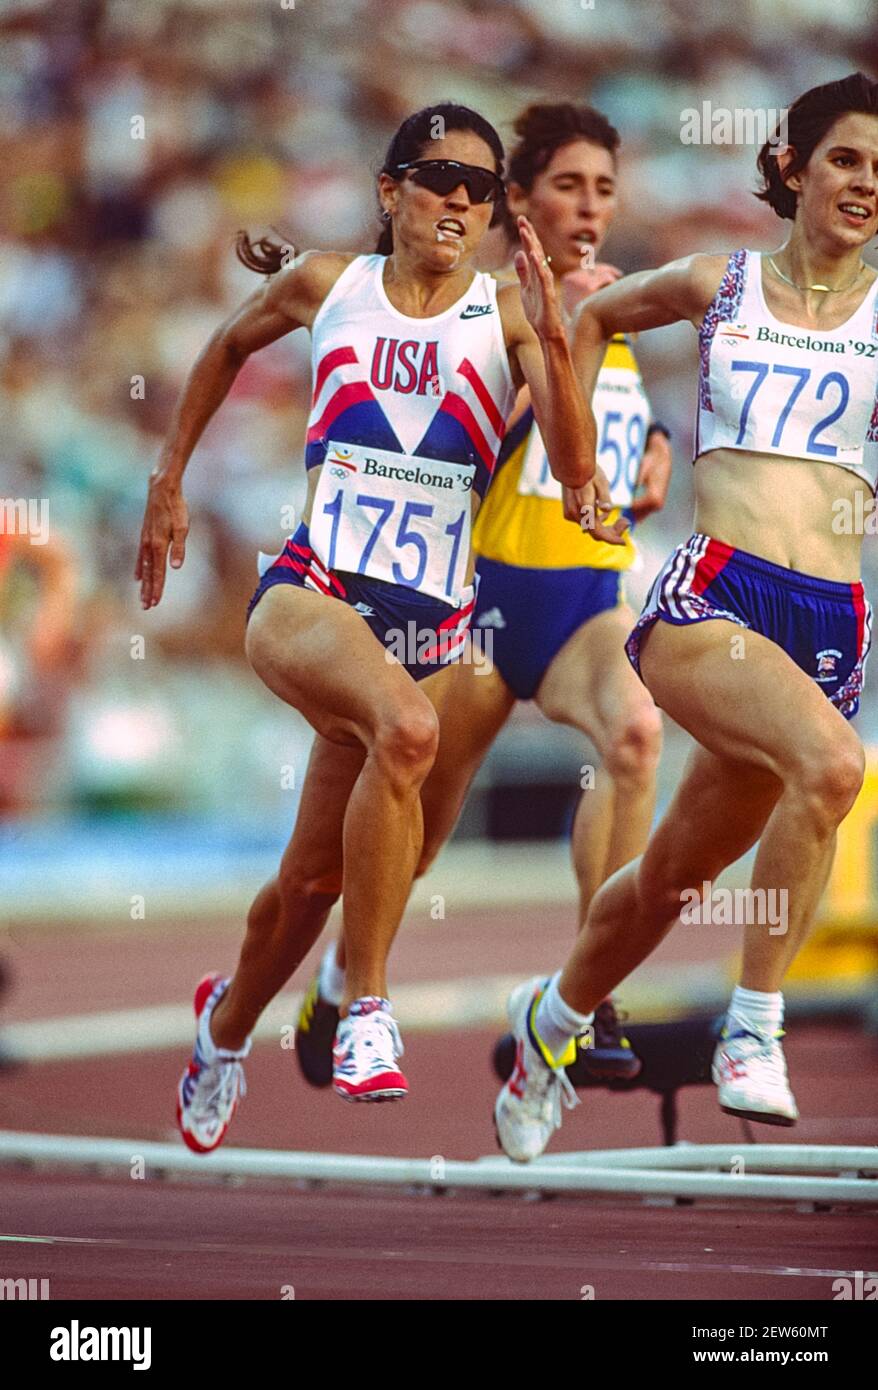 PattiSue Plumer (USA) #1751 competing in th Women's 3,000m Ht#1 at the 1992 Olympic Summer Games. Stock Photo